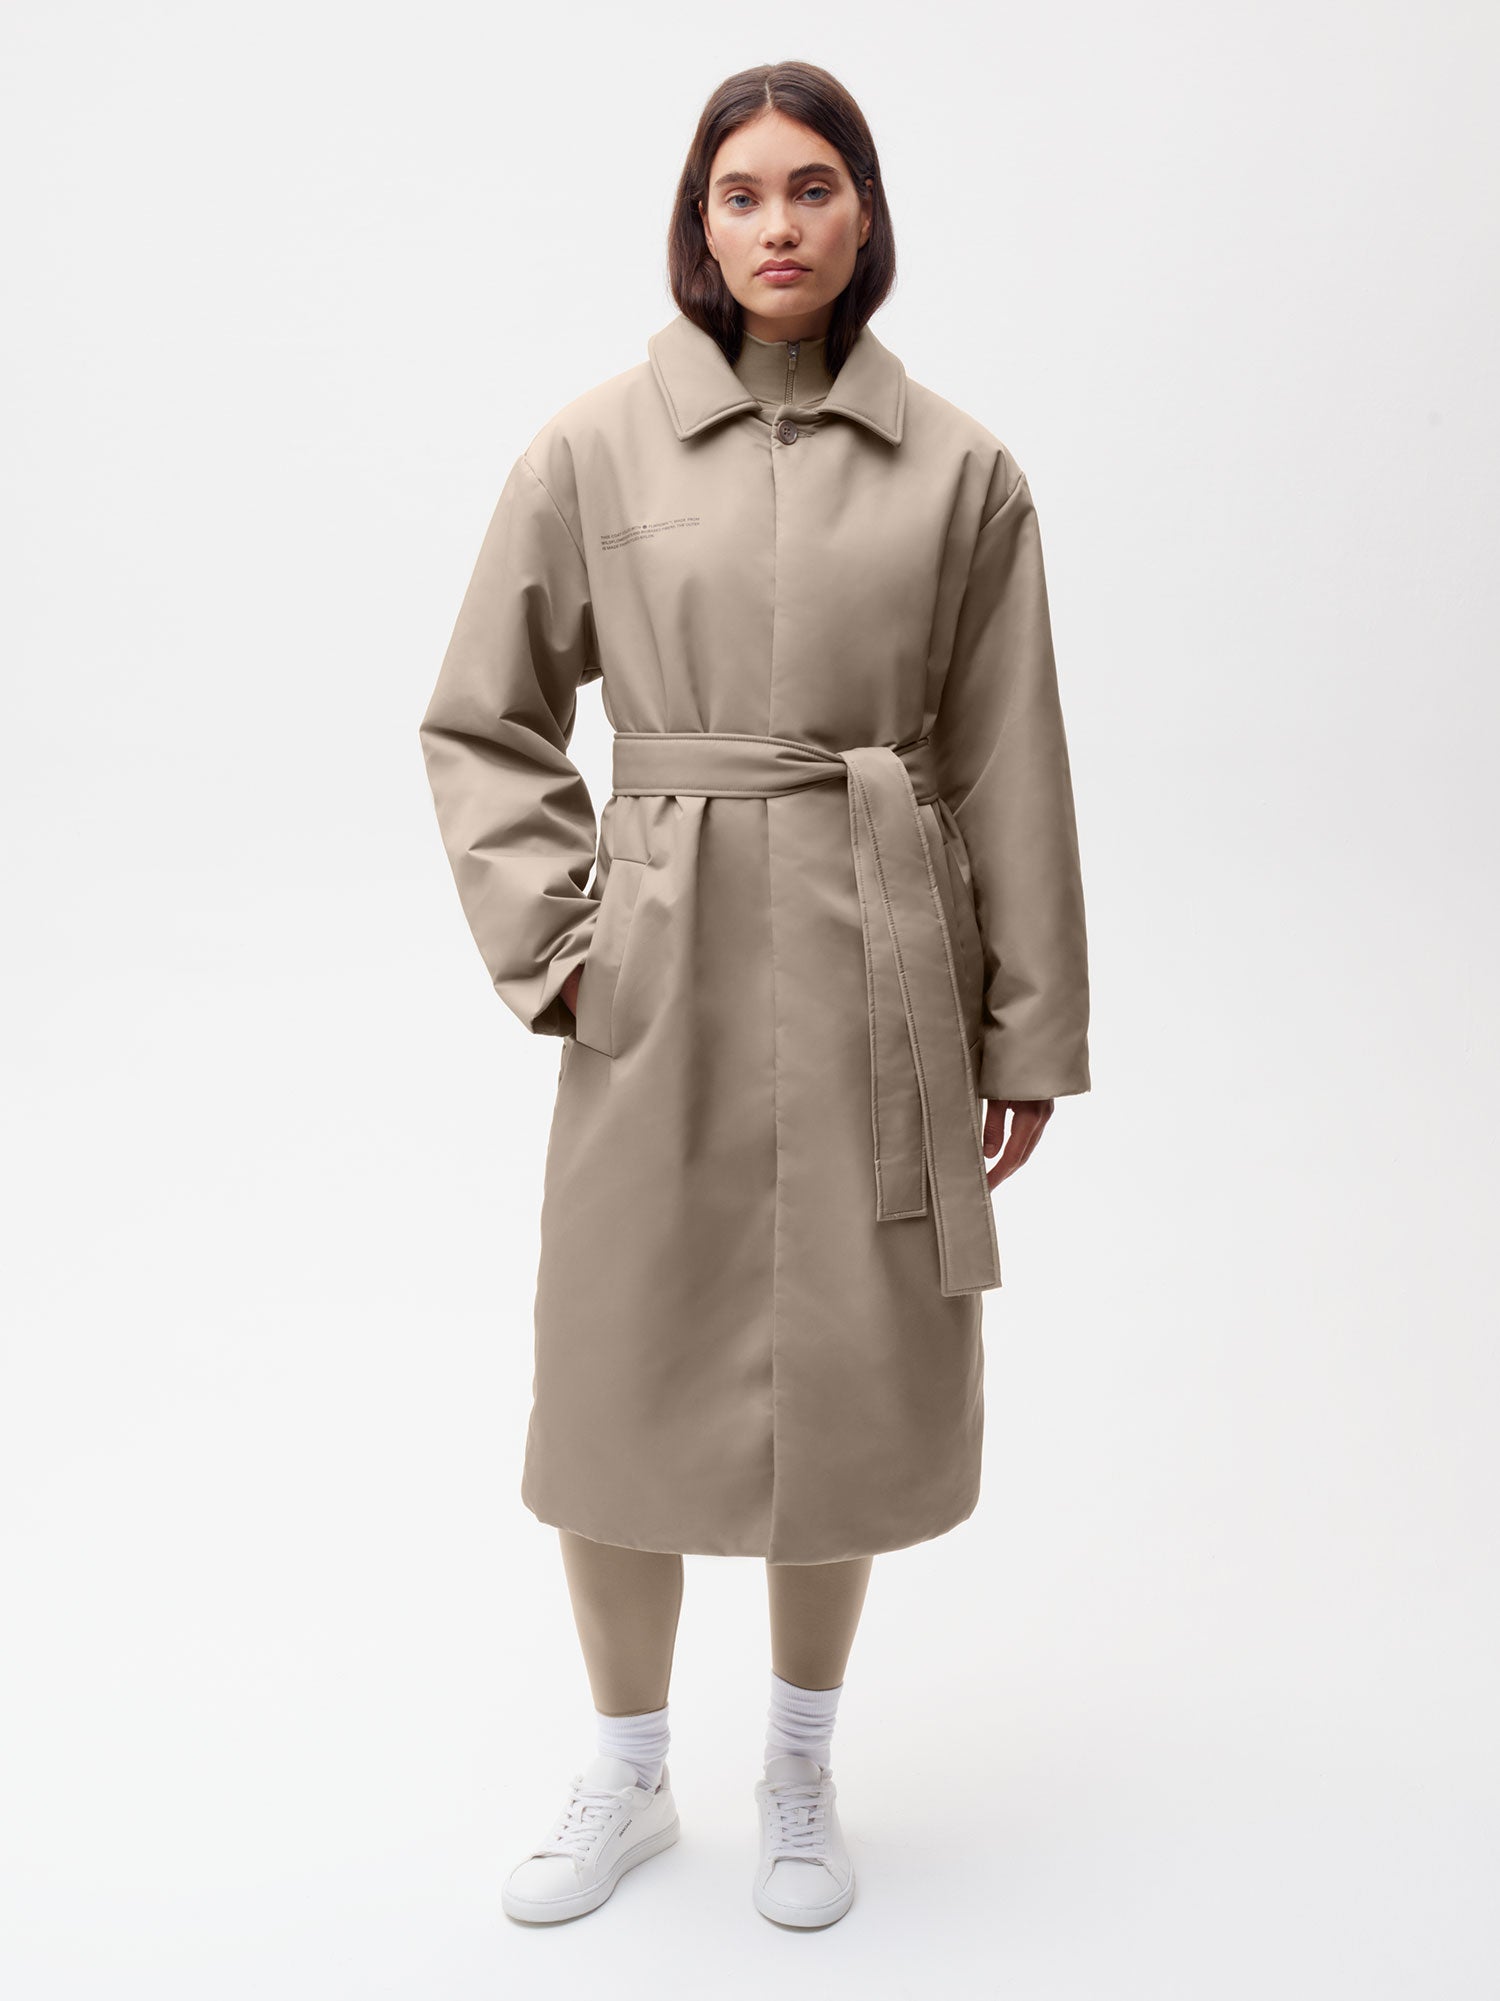 Flower-warmth Trench Coat - Taupe - Pangaia